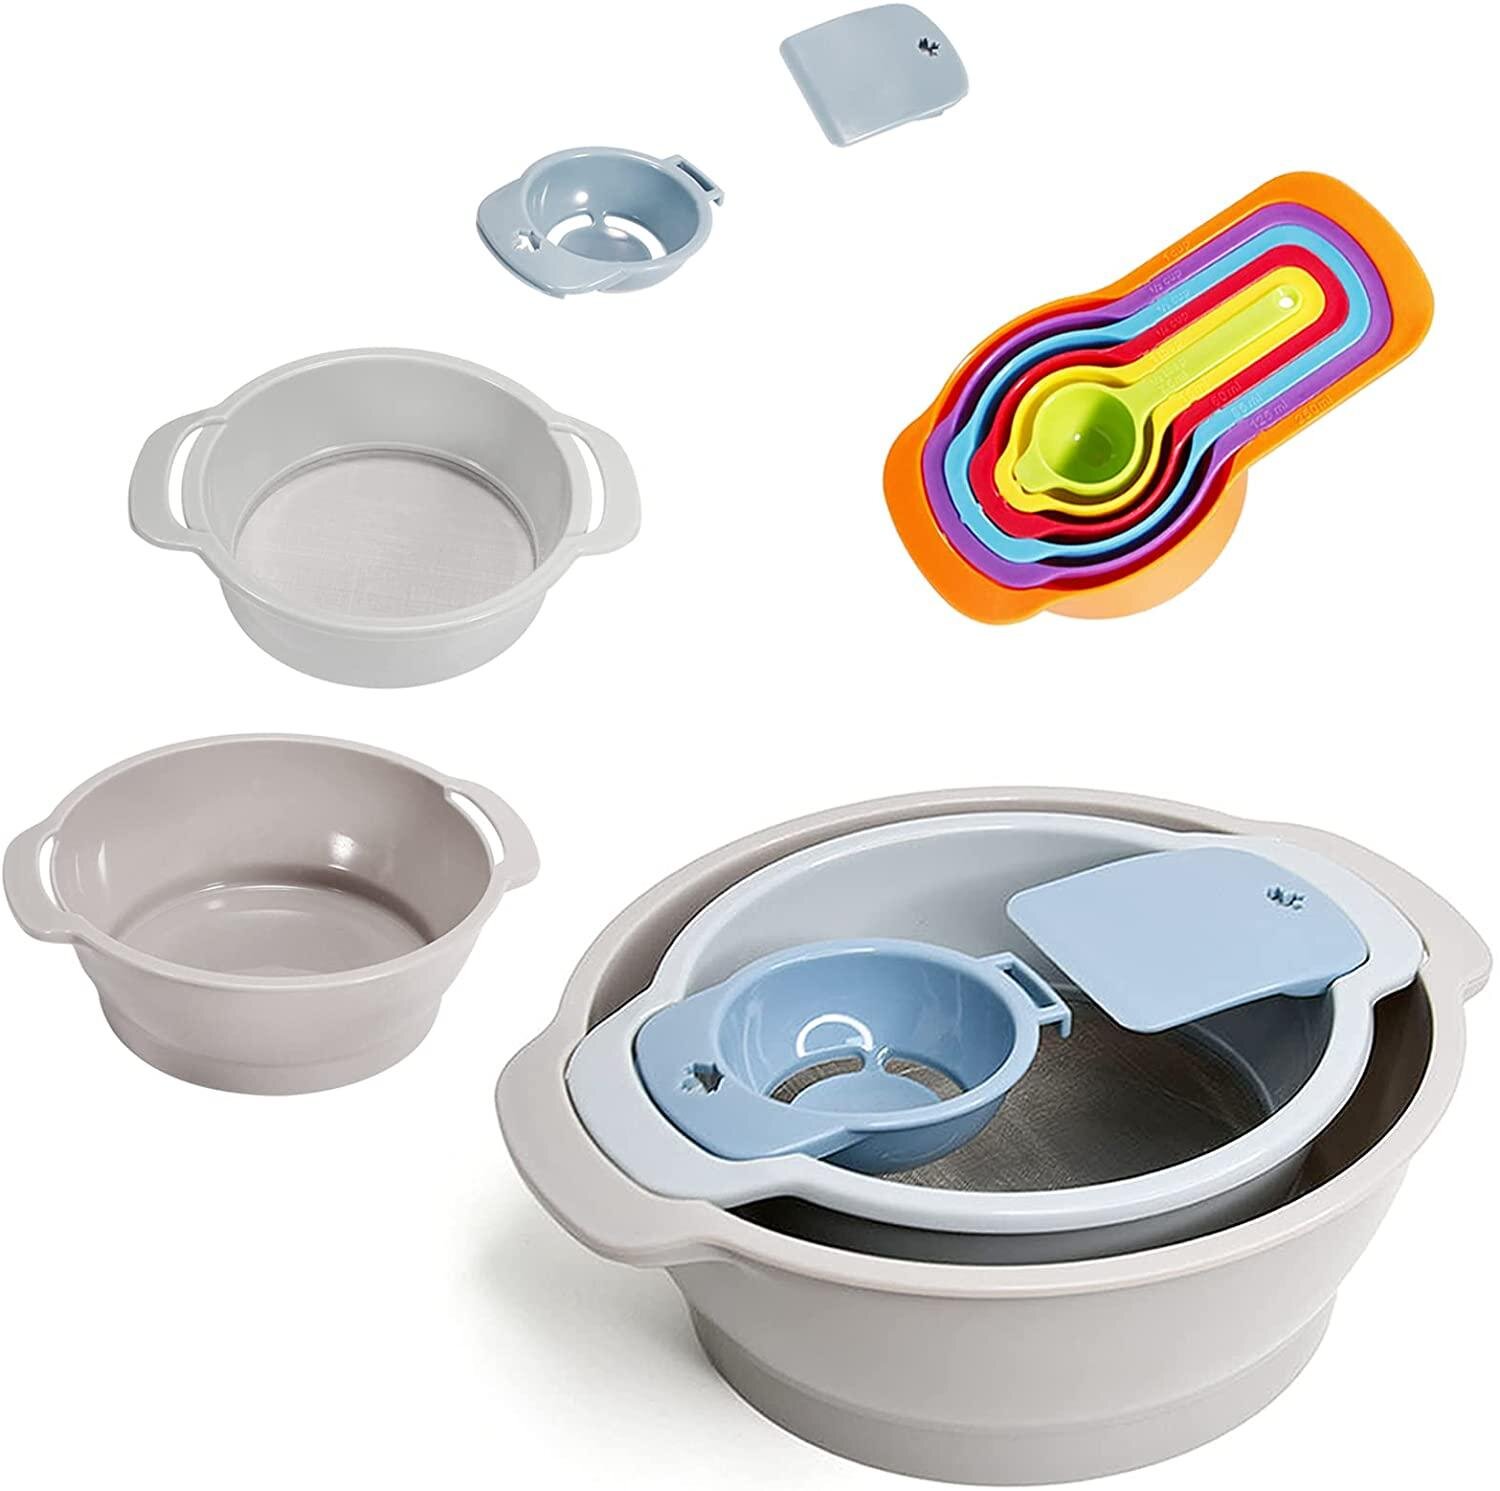 Dishwasher safe,Baking Tool Accessories Multi-Color KALREDE Mixing Bowls Set of 3 Piece,Plastic Mixing Bowl,BPA free 